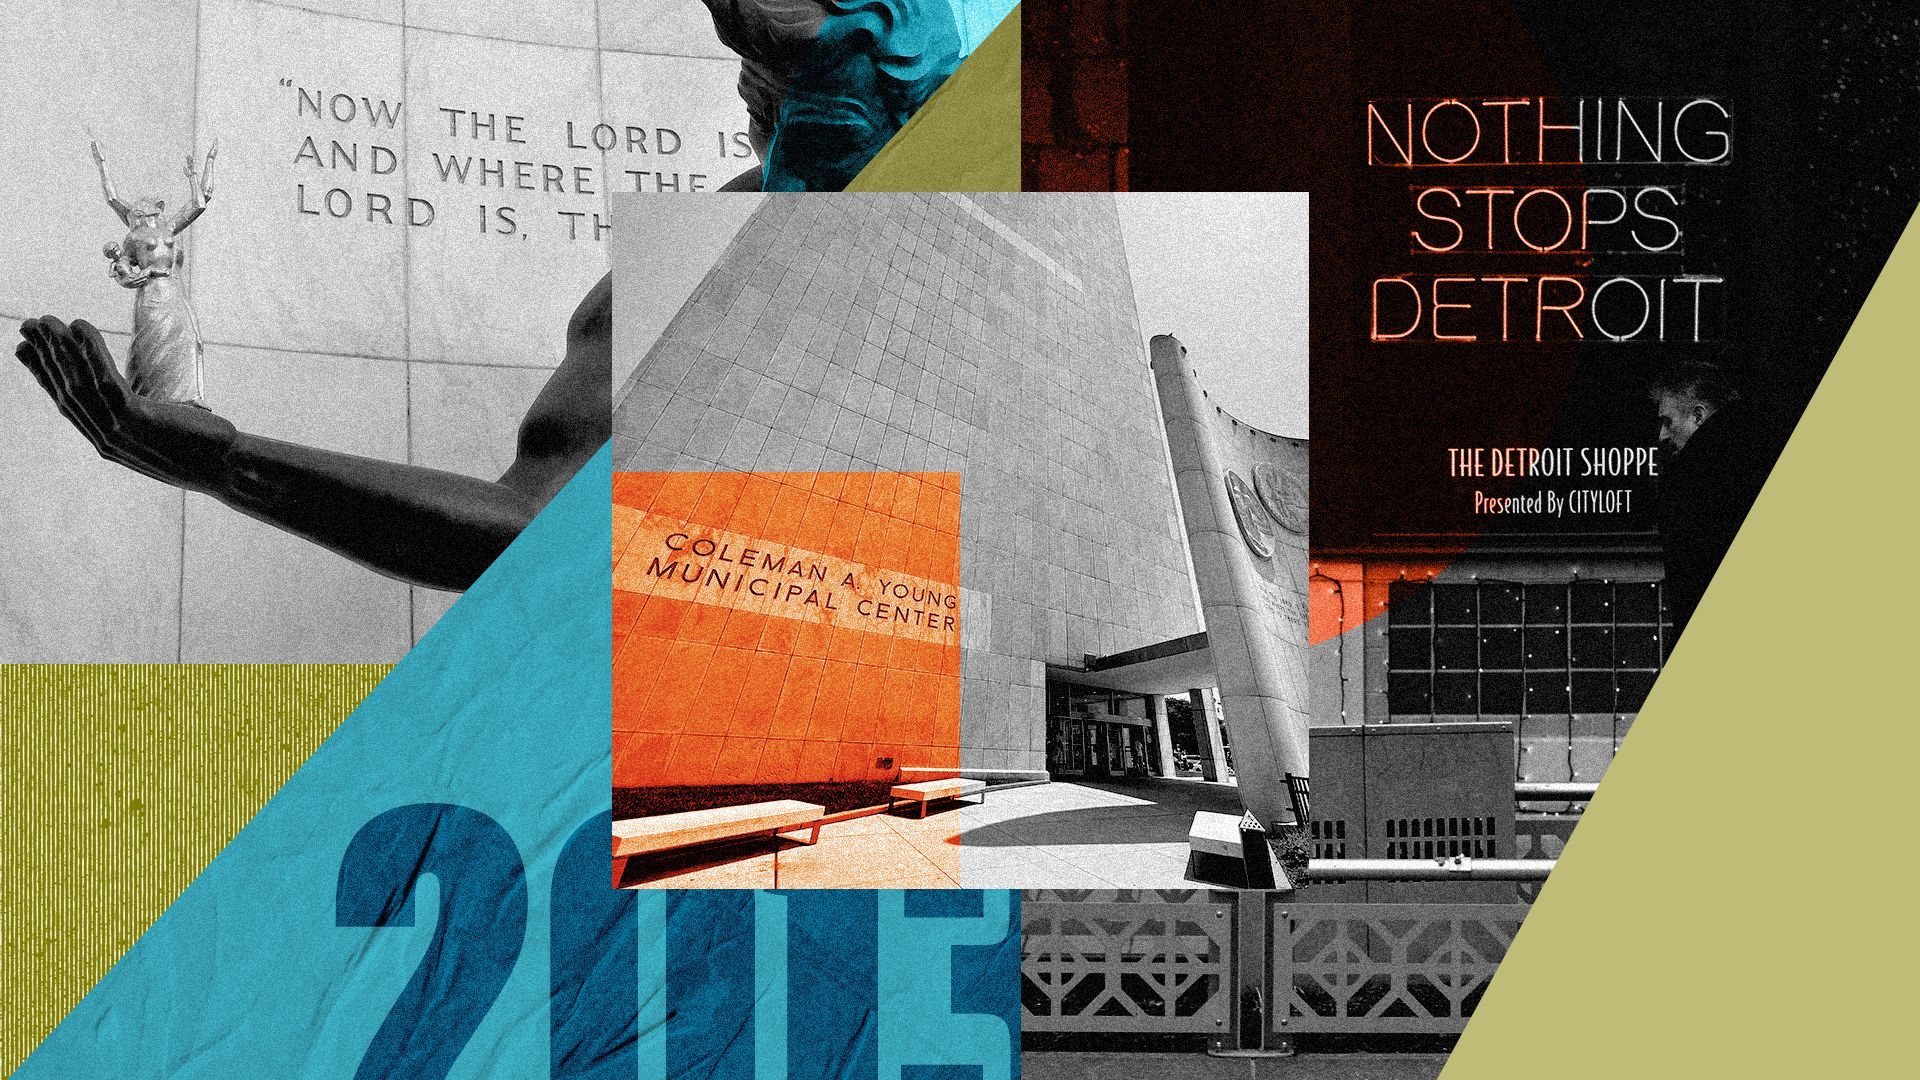 Photo illustration of the back of the Coleman A. Young Municipal Center with photos of a "Nothing Stops Detroit" sign, The Spirit of Detroit statue, and "2013" within geometric shapes.